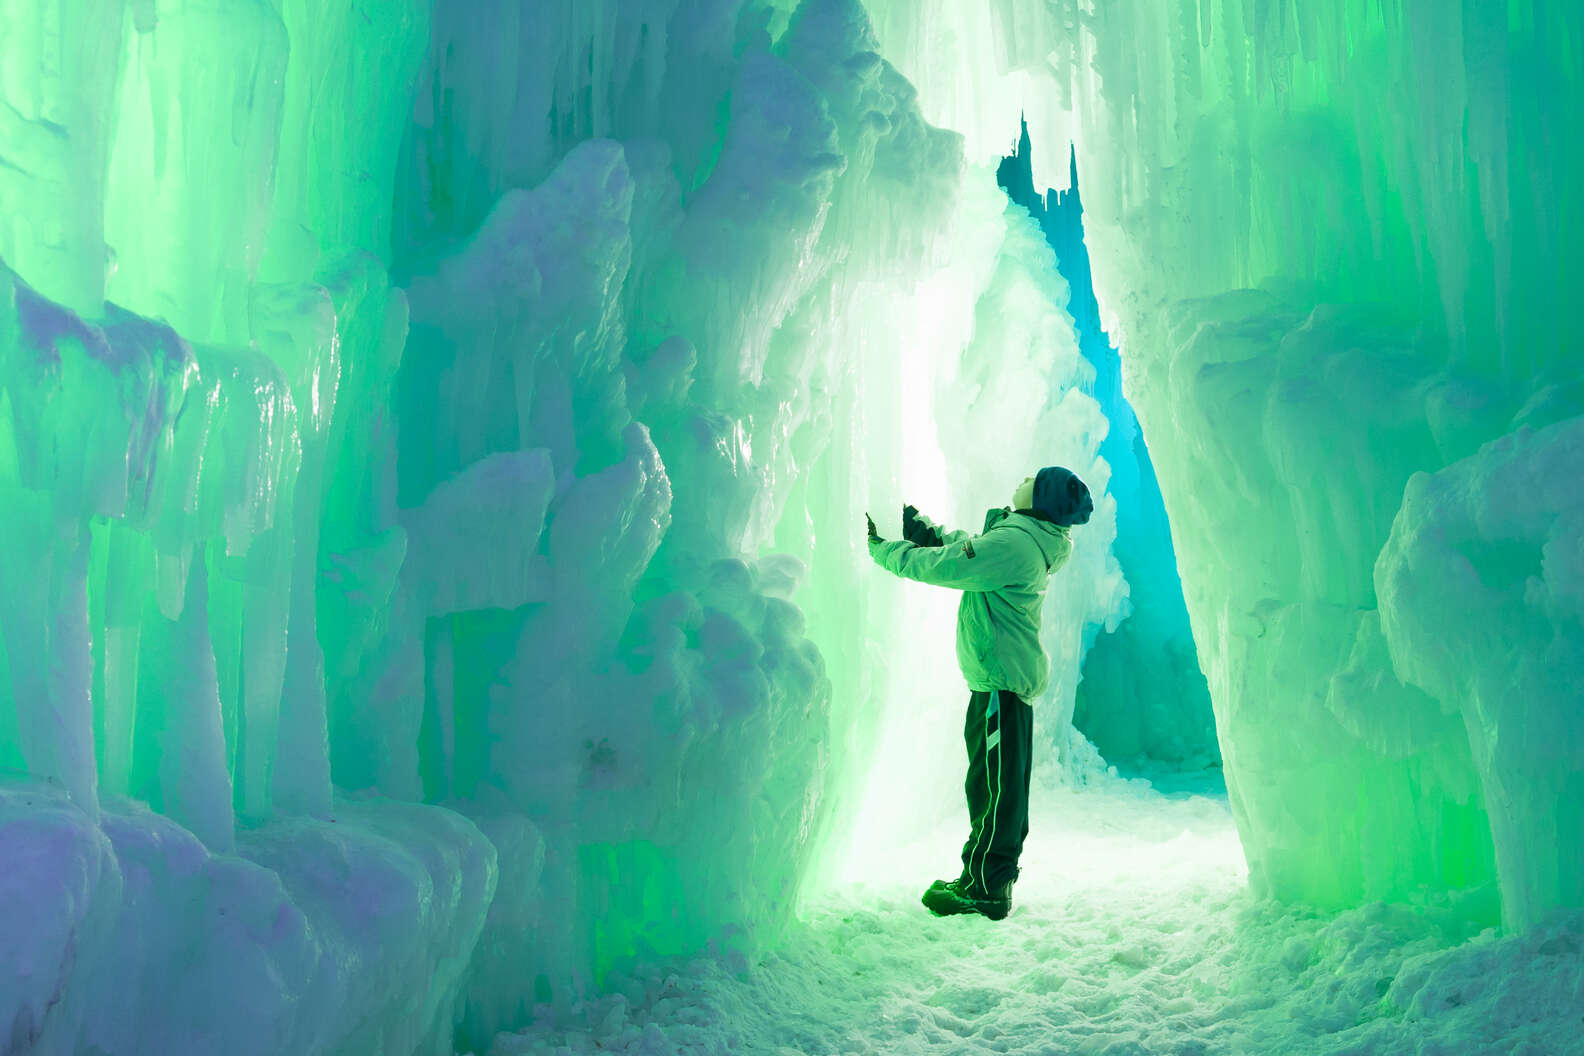 Photo by Mary Siversten, courtesy of Ice Castles